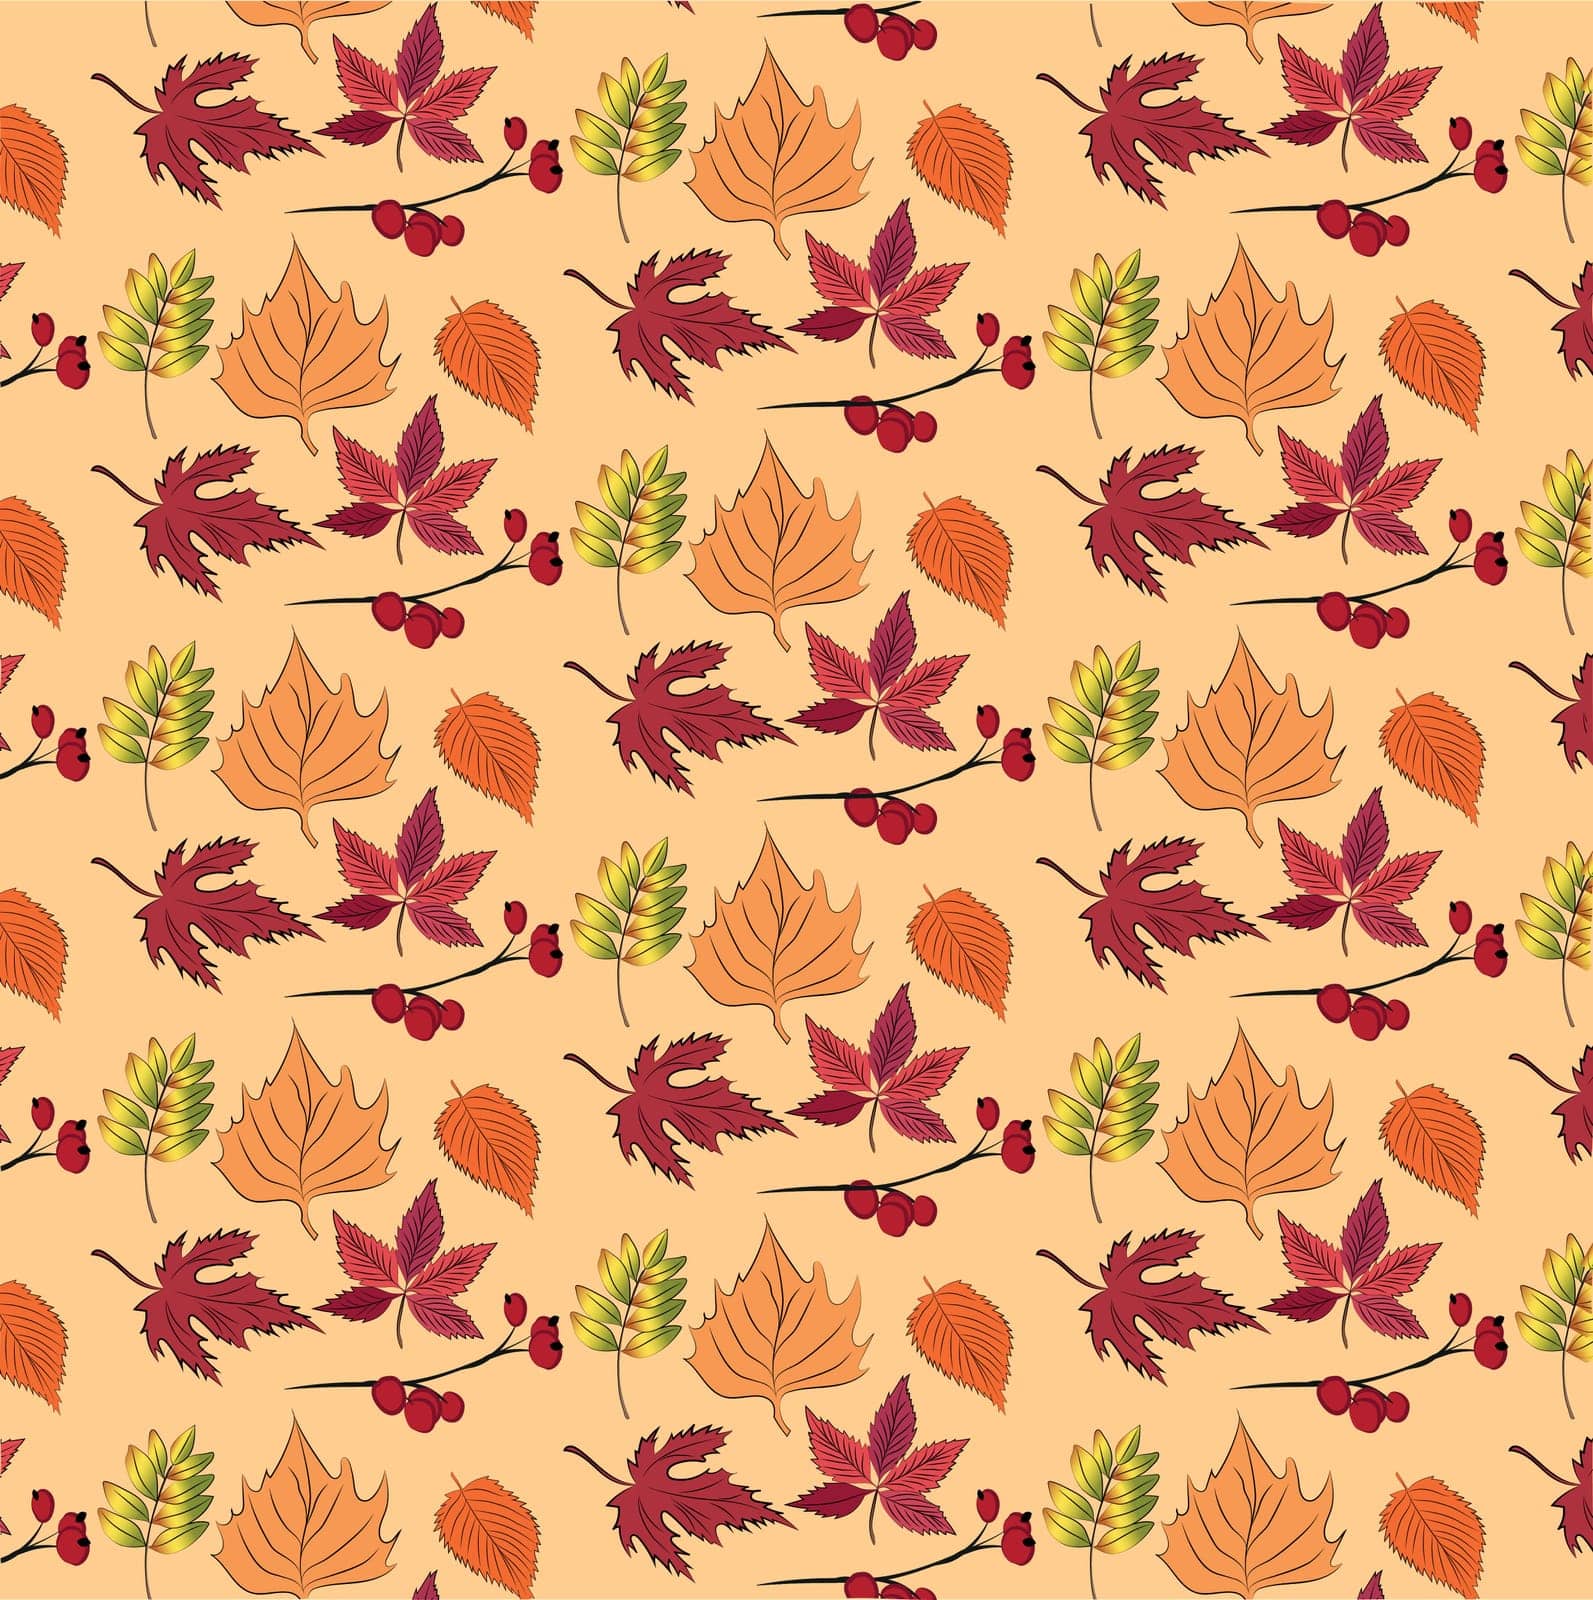 Autumn pumpkins with teal background pattern by milastokerpro